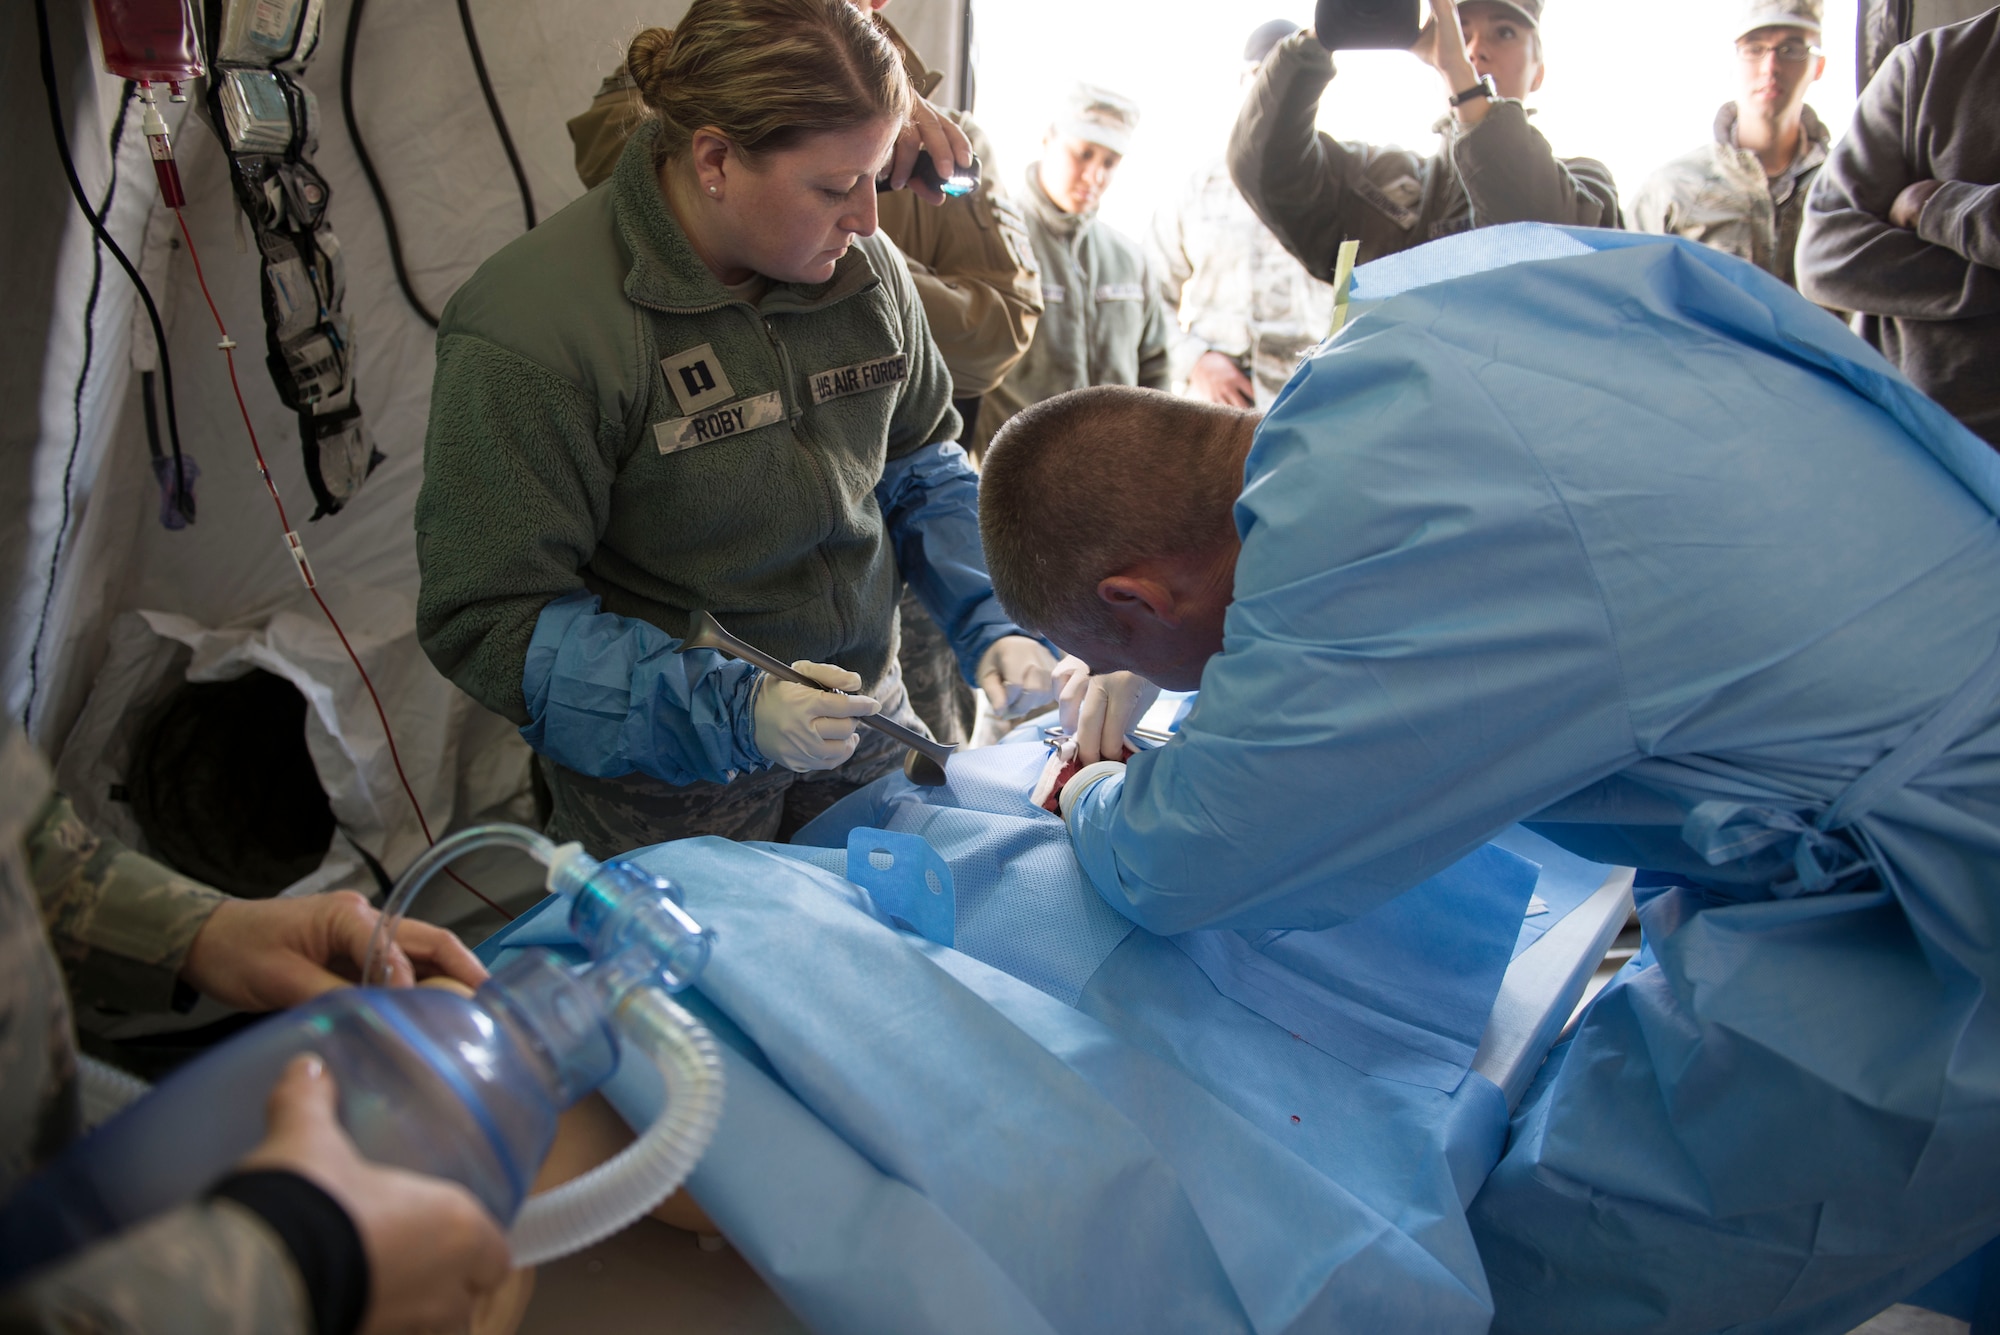 A surgical team rushes into action on a simulated fatal injury during Gunfighter Flag 16-1 at Mountain Home Air Force Base, Idaho, Nov. 5, 2015. Some simulated injuries were meant to be distractions from others to test the team’s ability to triage different injuries. (U.S. Air Force photo/Airman 1st Class Jessica H. Evans)